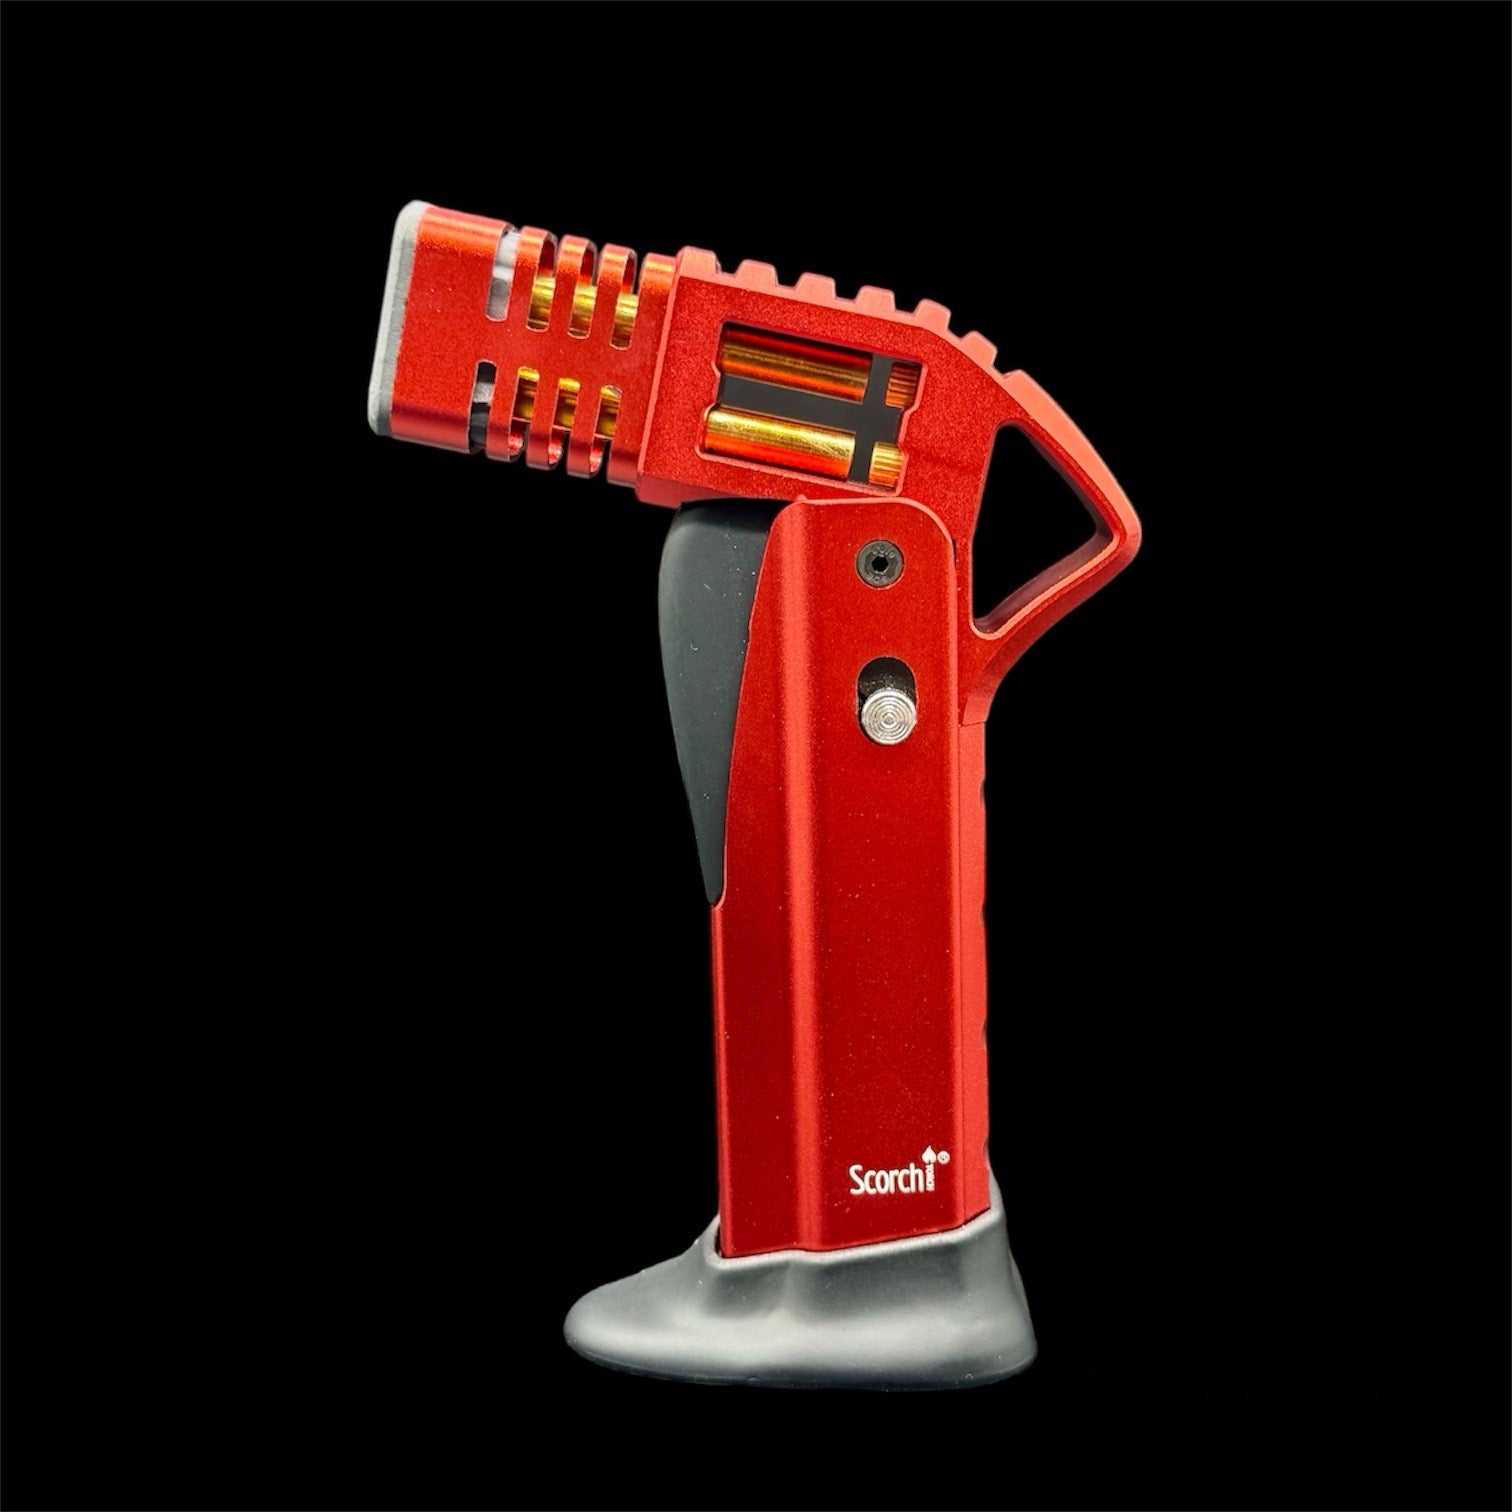 Scorch Torch Lighter 51493  red color 